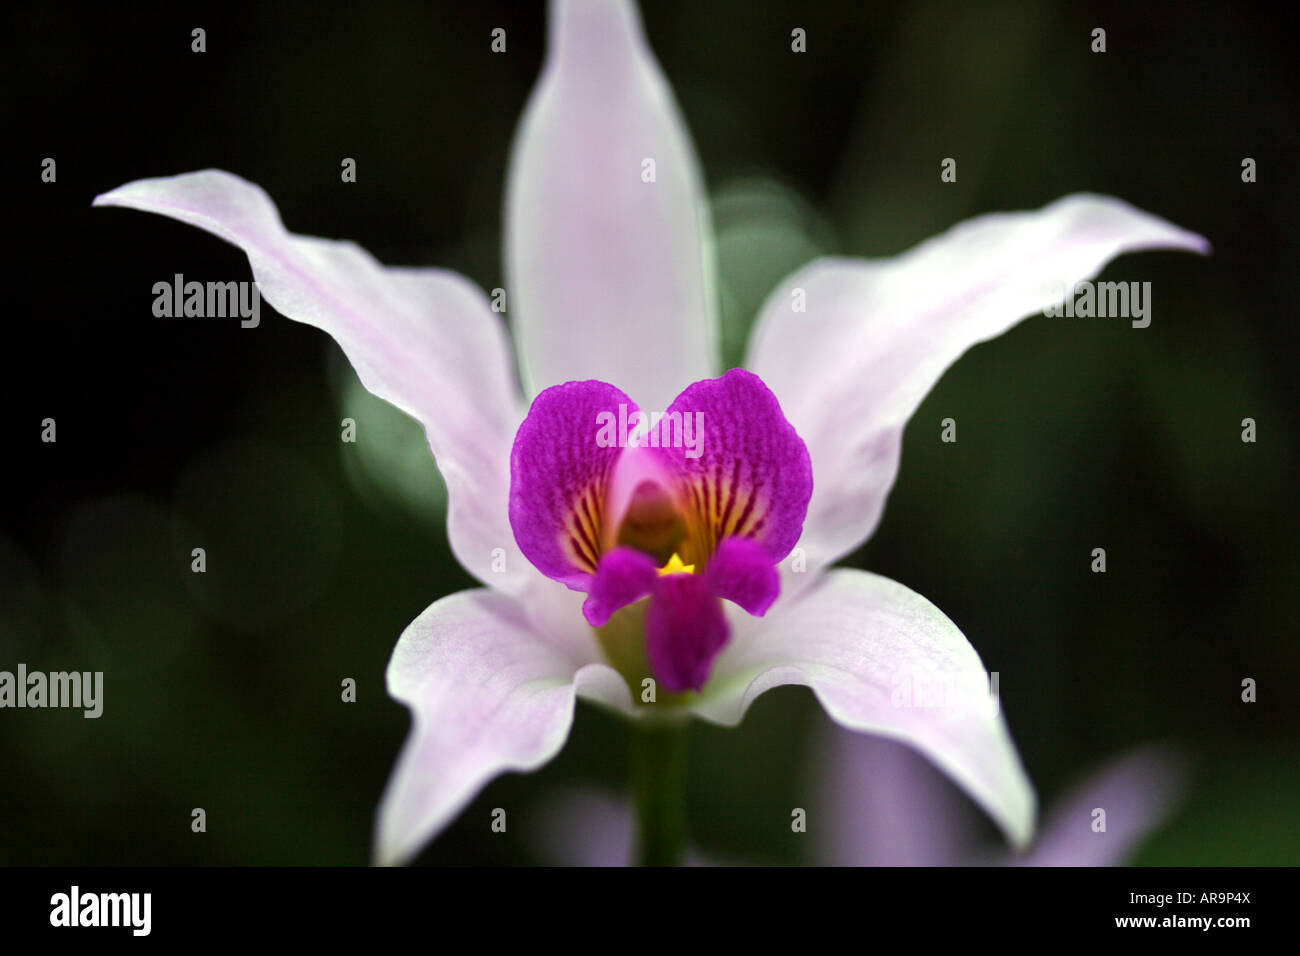 Close-up of a Laelia orchid flower Stock Photo